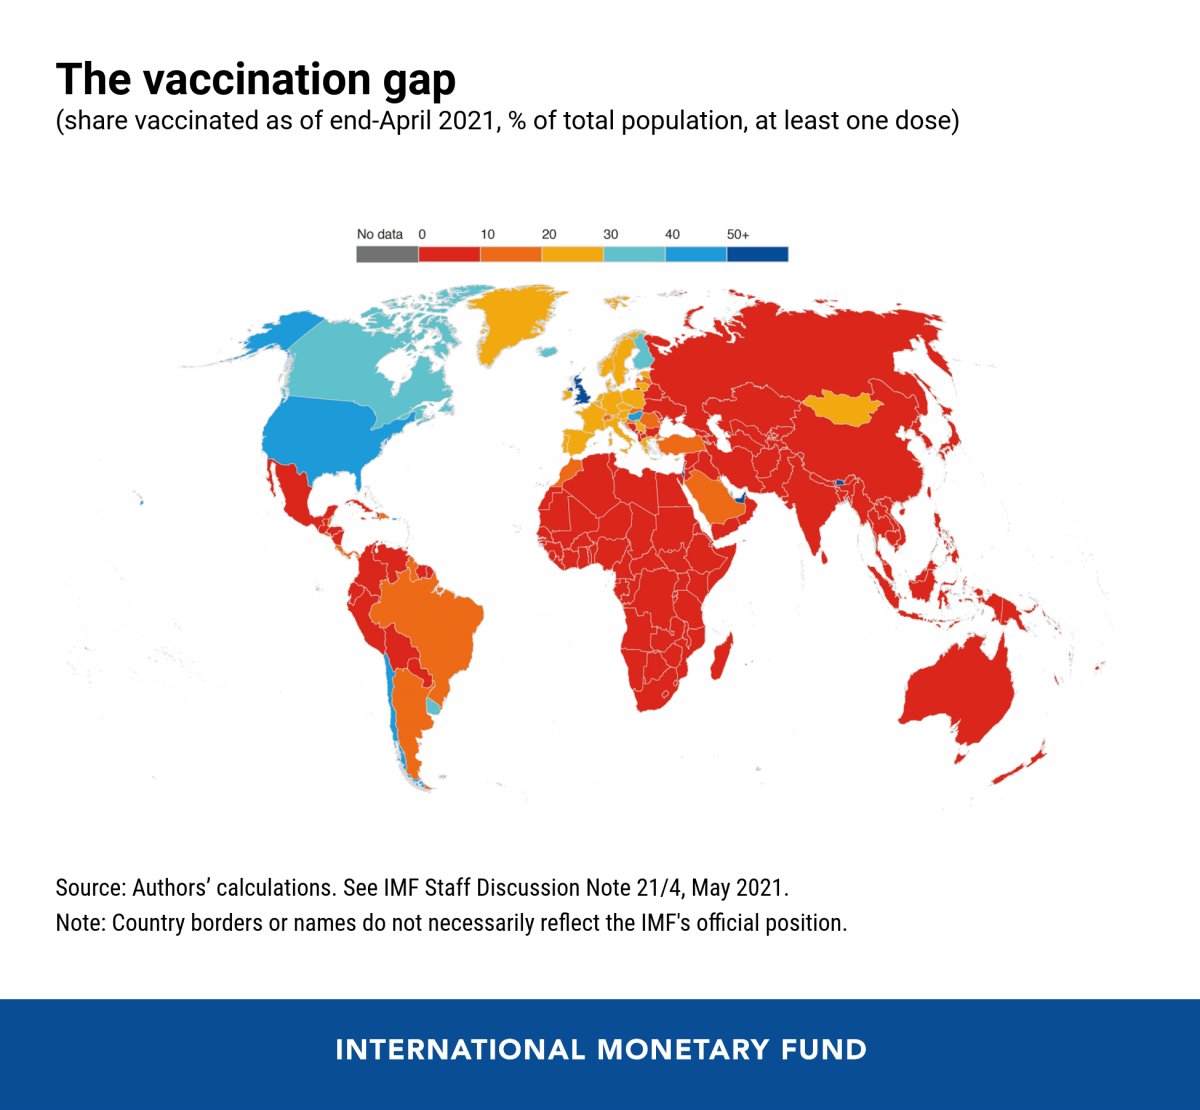 In many countries, #COVID19 vaccines have been given to less than 1% of the population. On #IMFBlog, @KGeorgieva, @GitaGopinath and @_RuchirAgarwal propose a $50 billion plan for bringing the health crisis under control. ow.ly/H15n50ERQJc #PandemicPlan